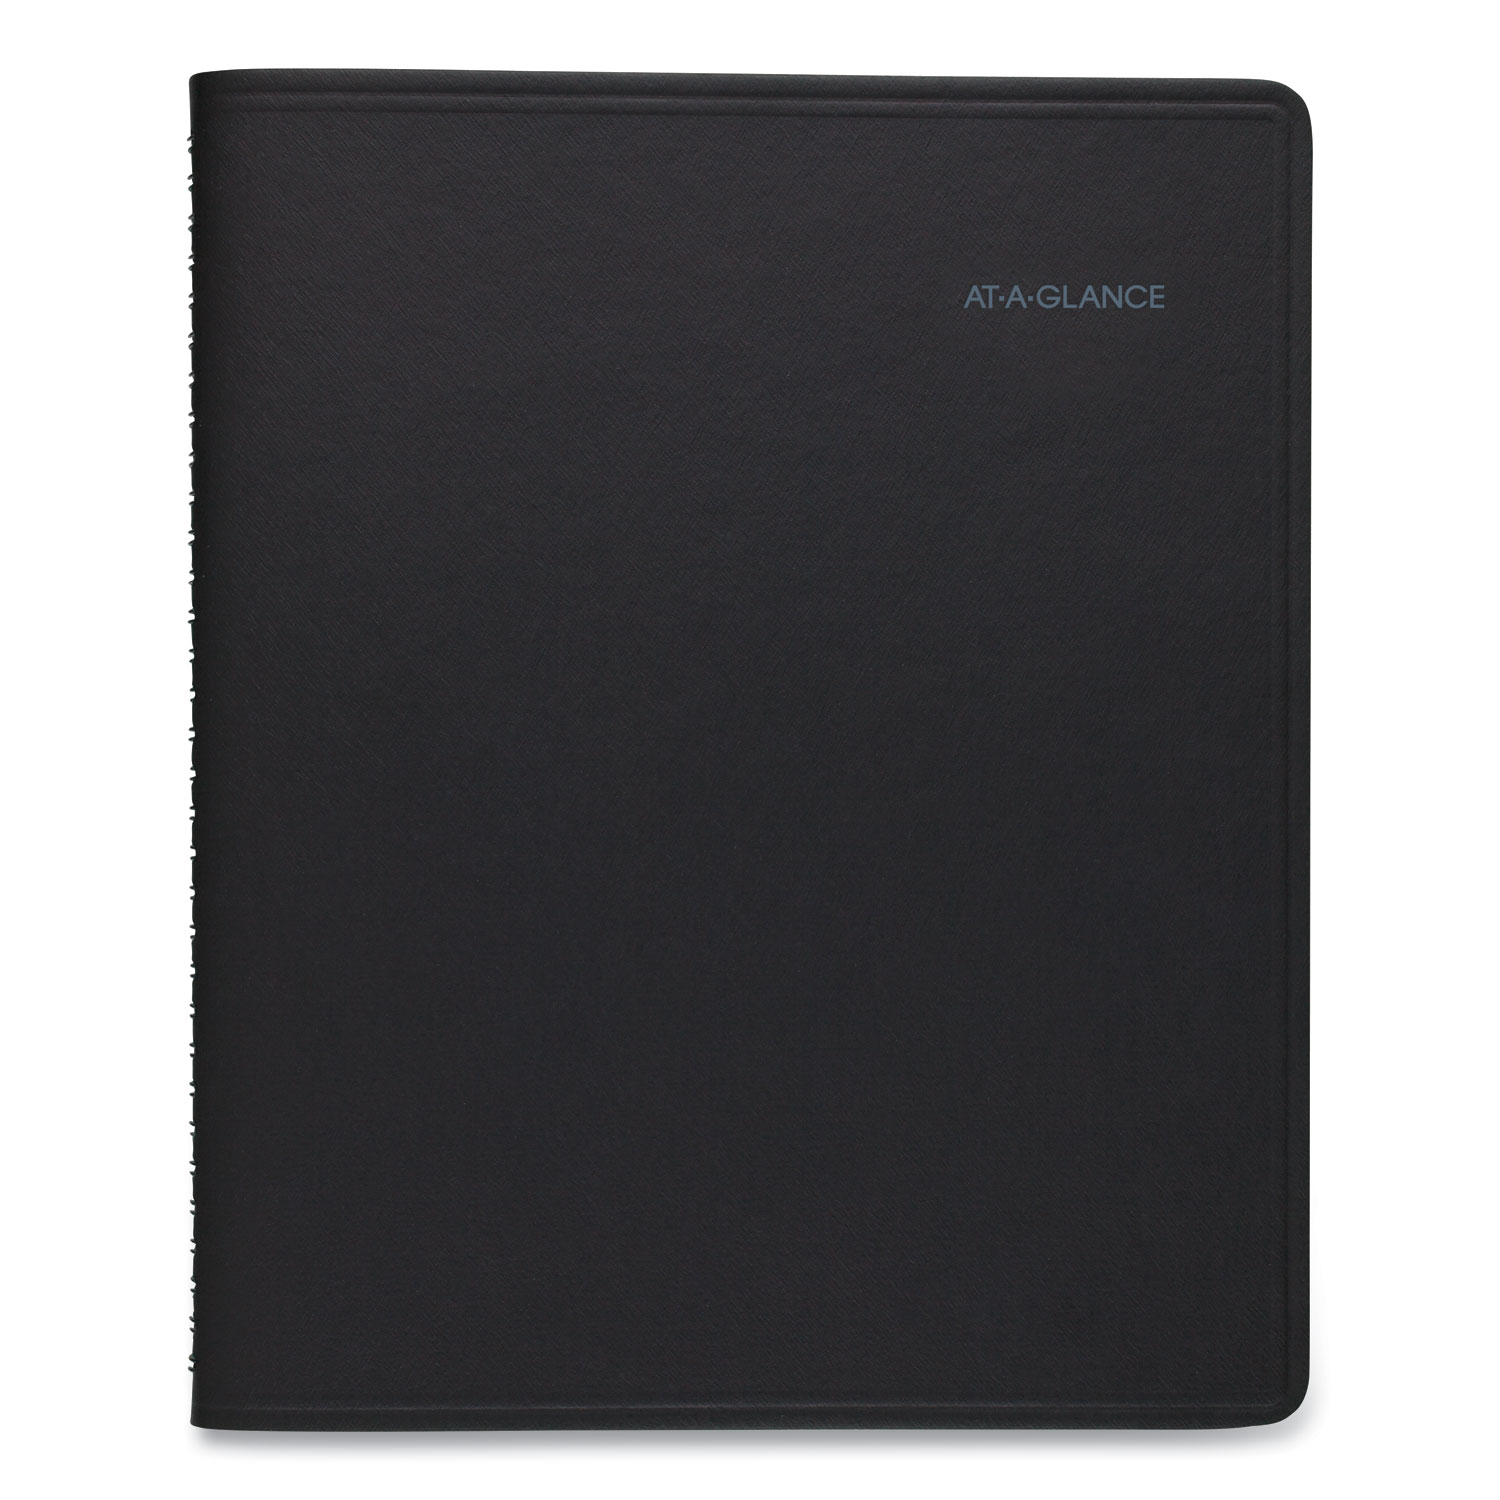 QuickNotes Large Black AT-A-GLANCE 2020 Monthly Planner/Appointment Book 760605 8-1/4 x 11 